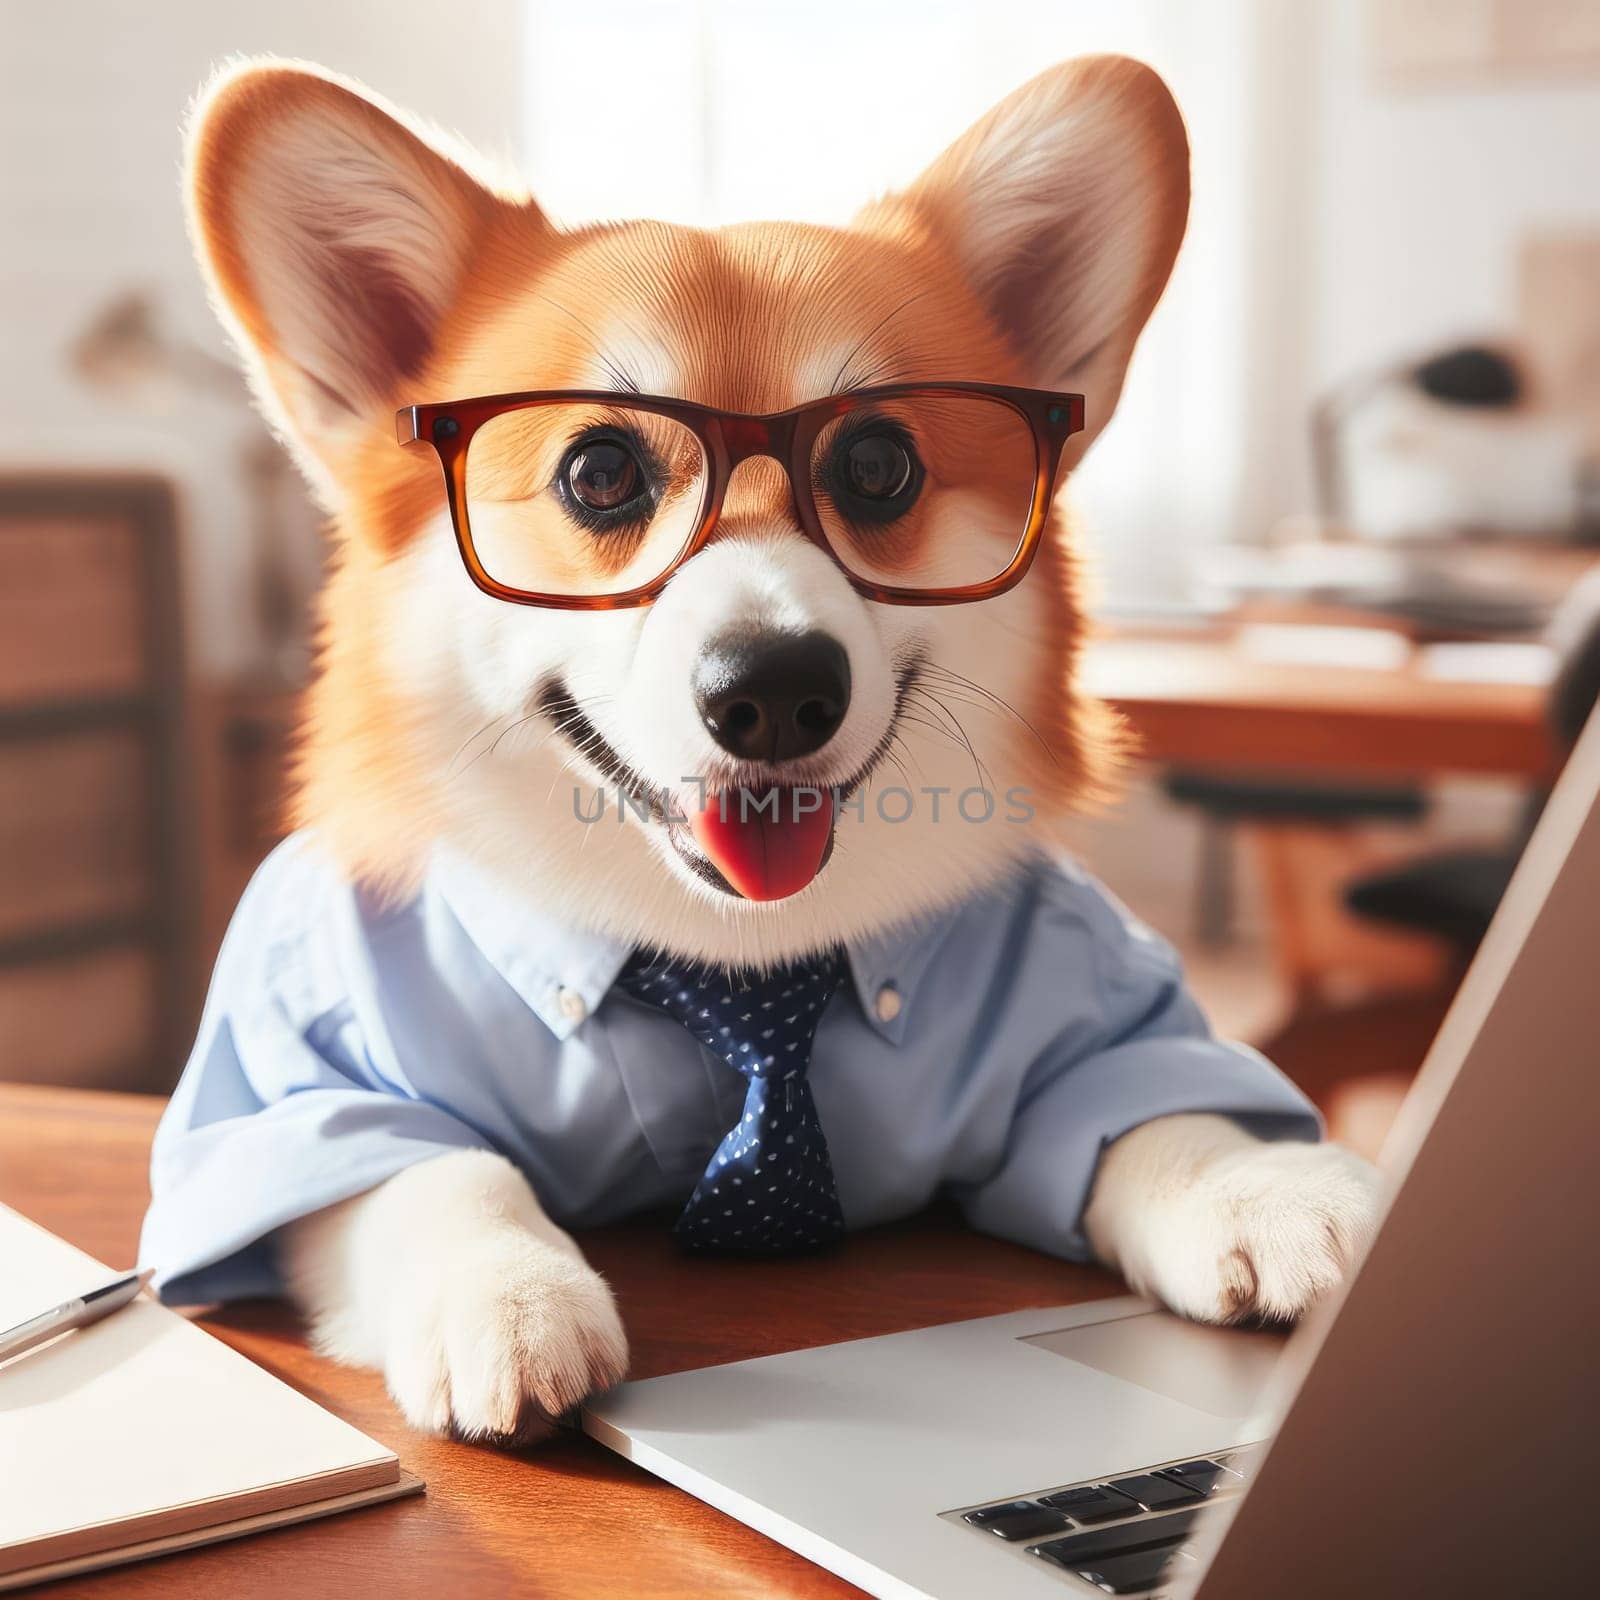 Cute corgi dog looking into computer laptop working in glasses and shirt by Kobysh